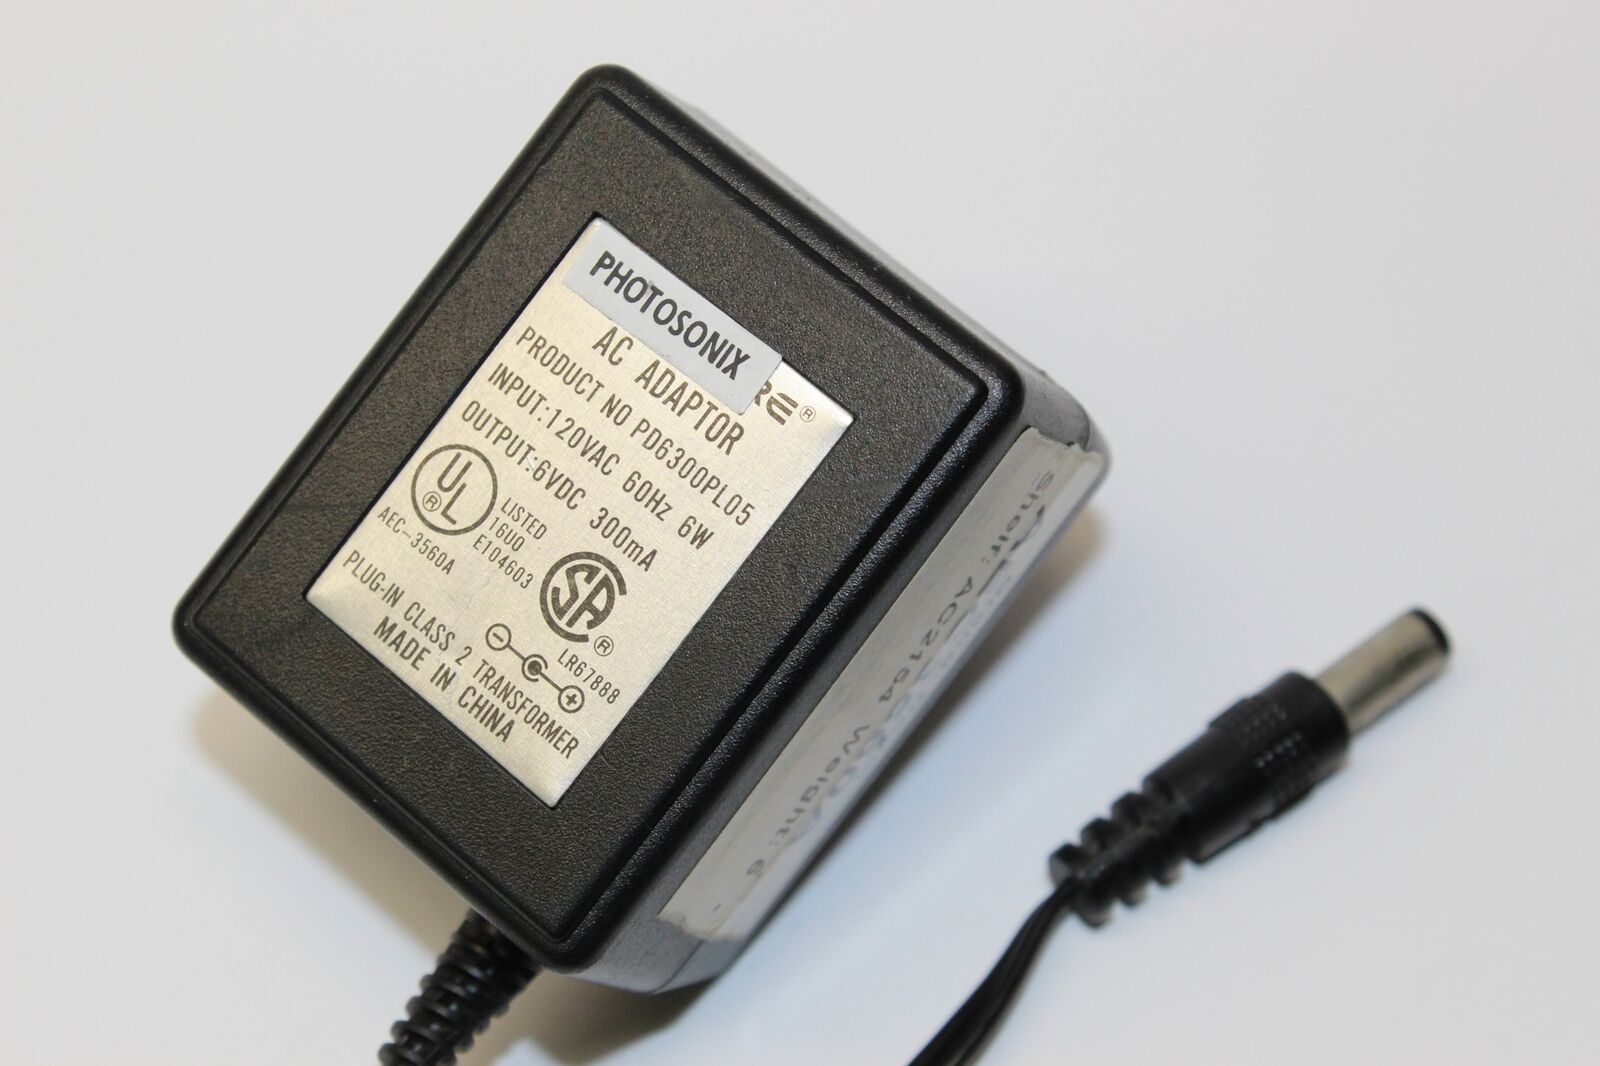 New 6V 300mA Photosonix PD6300PL05 Power Supply Ac Adapter